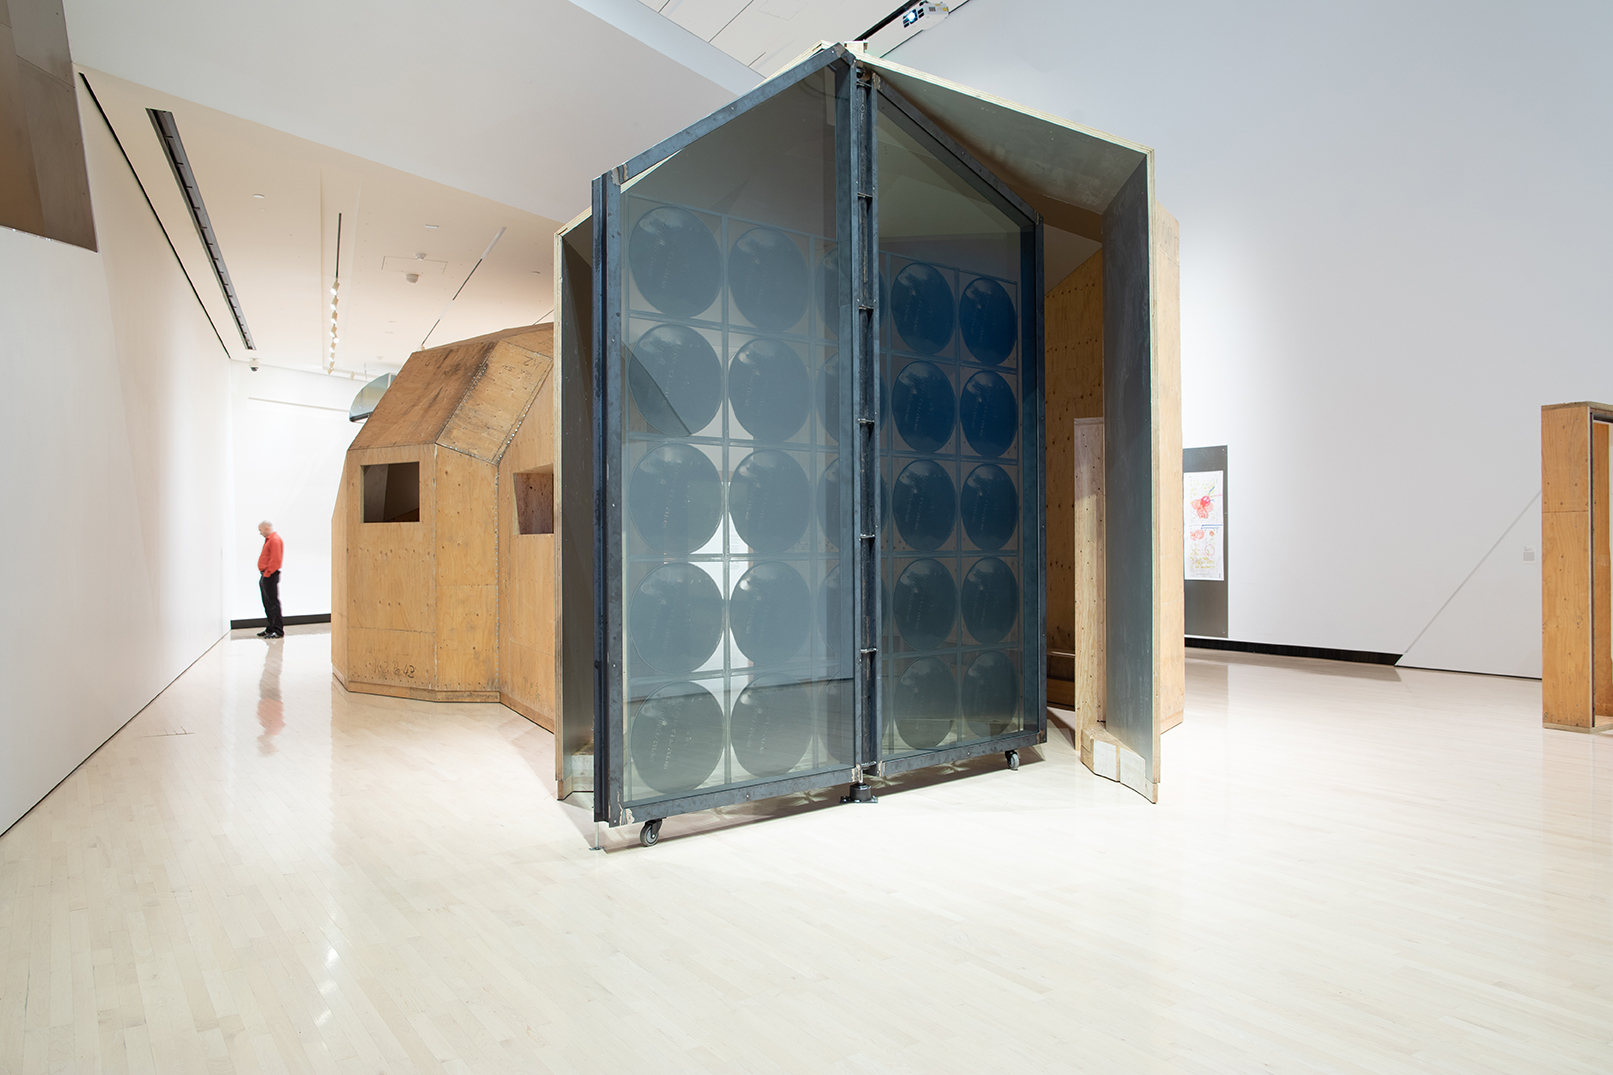 <i>Oscar Tuazon: Water School</i>, installation view at the Eli and Edythe Broad Art Museum at Michigan State University, 2019. Photo: Eat Pomegranate Photography